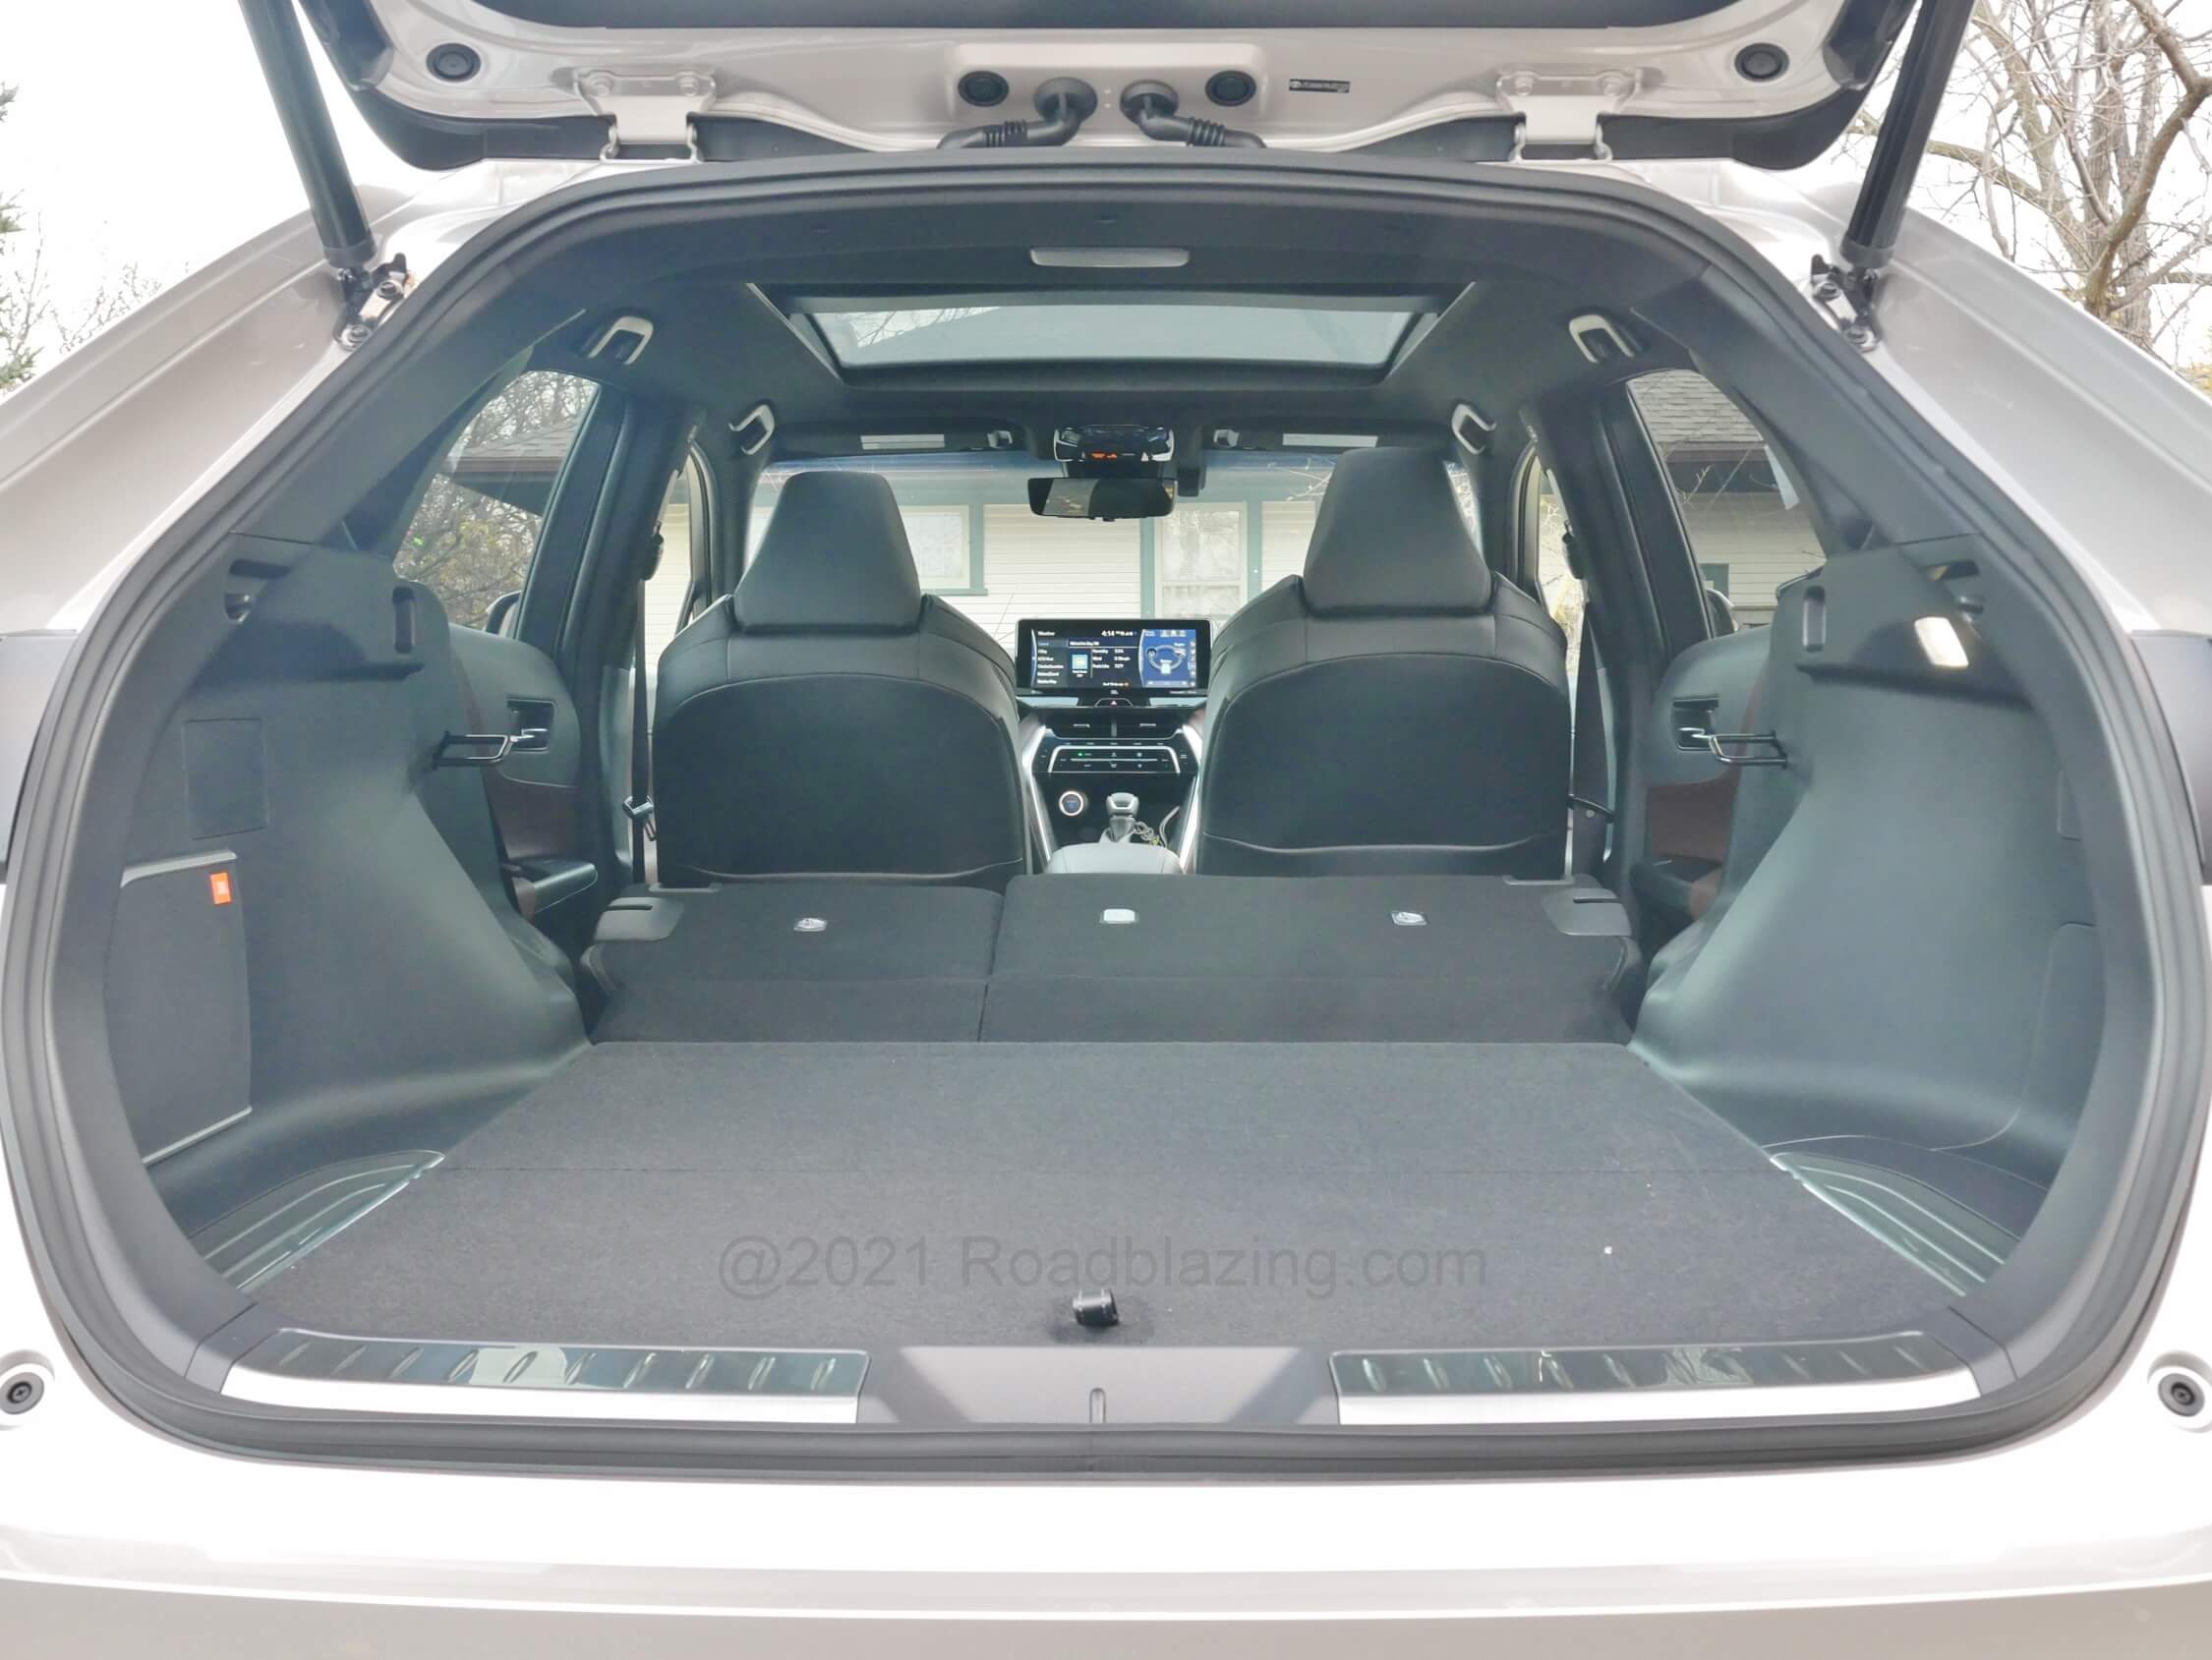 2021 Toyota Venza Hybrid Limited: So far no RAV4 is equipped with a Star Gaze electrochromic tinted clear to opaque panorama moonroof